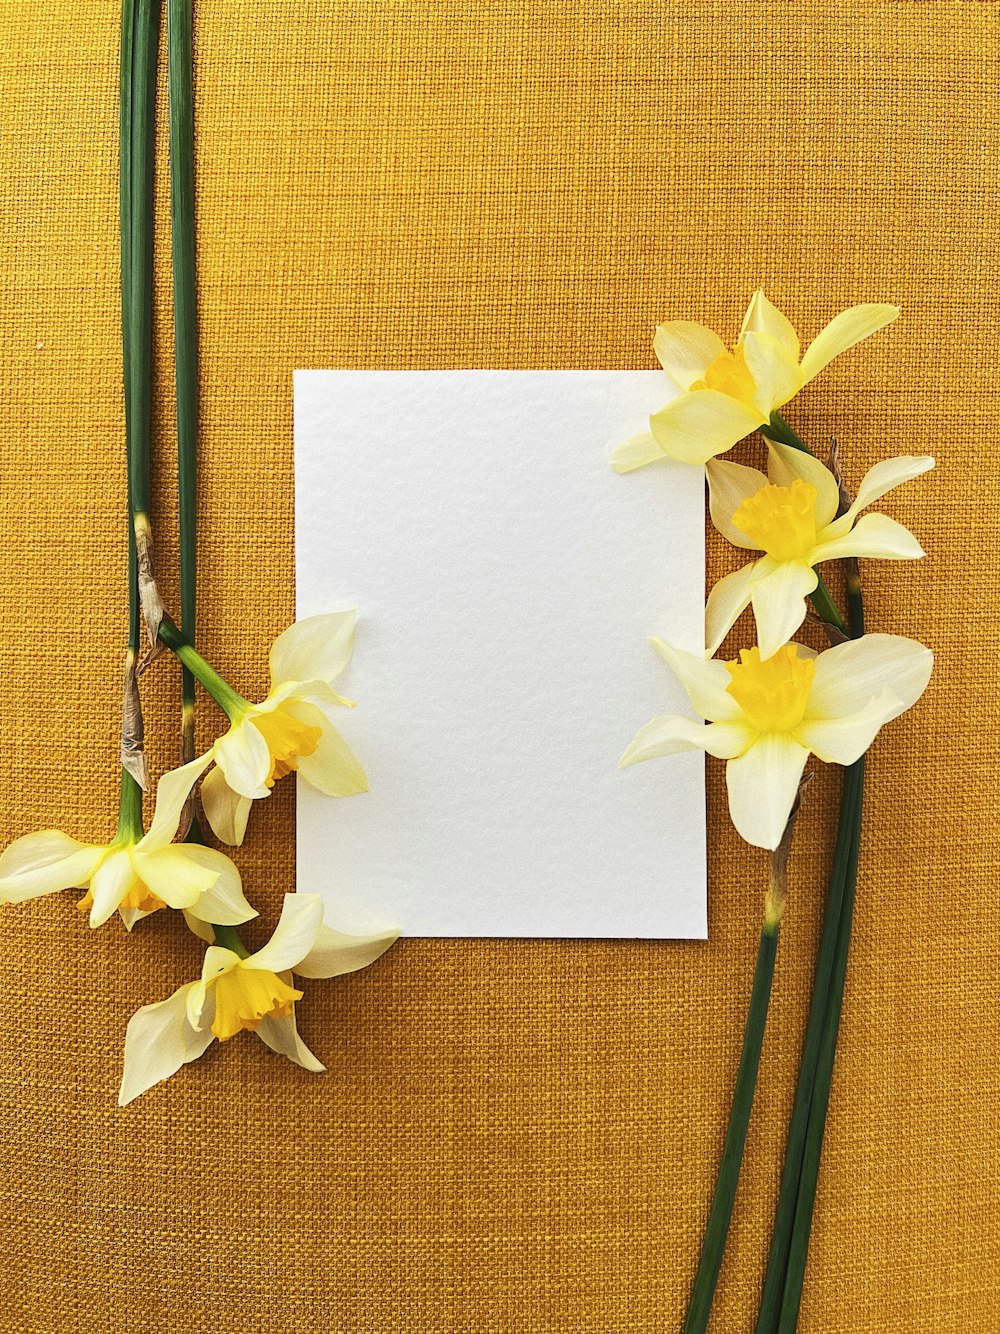 a piece of paper with some yellow flowers on it